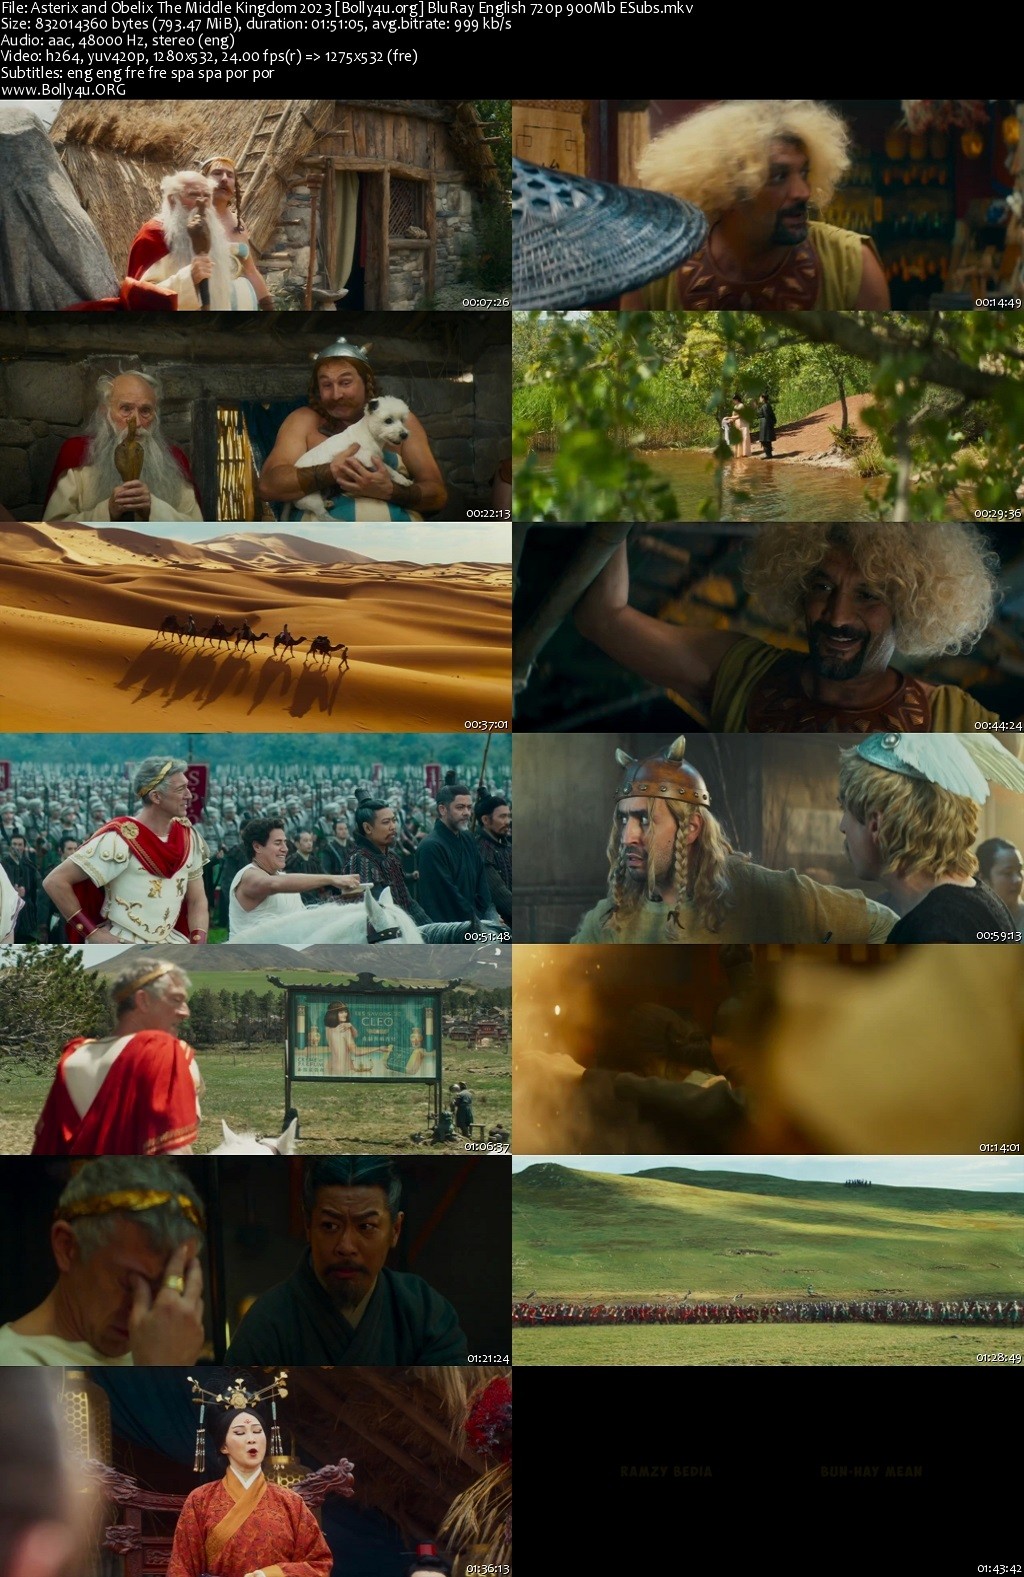 18+ Asterix and Obelix The Middle Kingdom 2023 WEB-DL English Full Movie Download 720p 480p